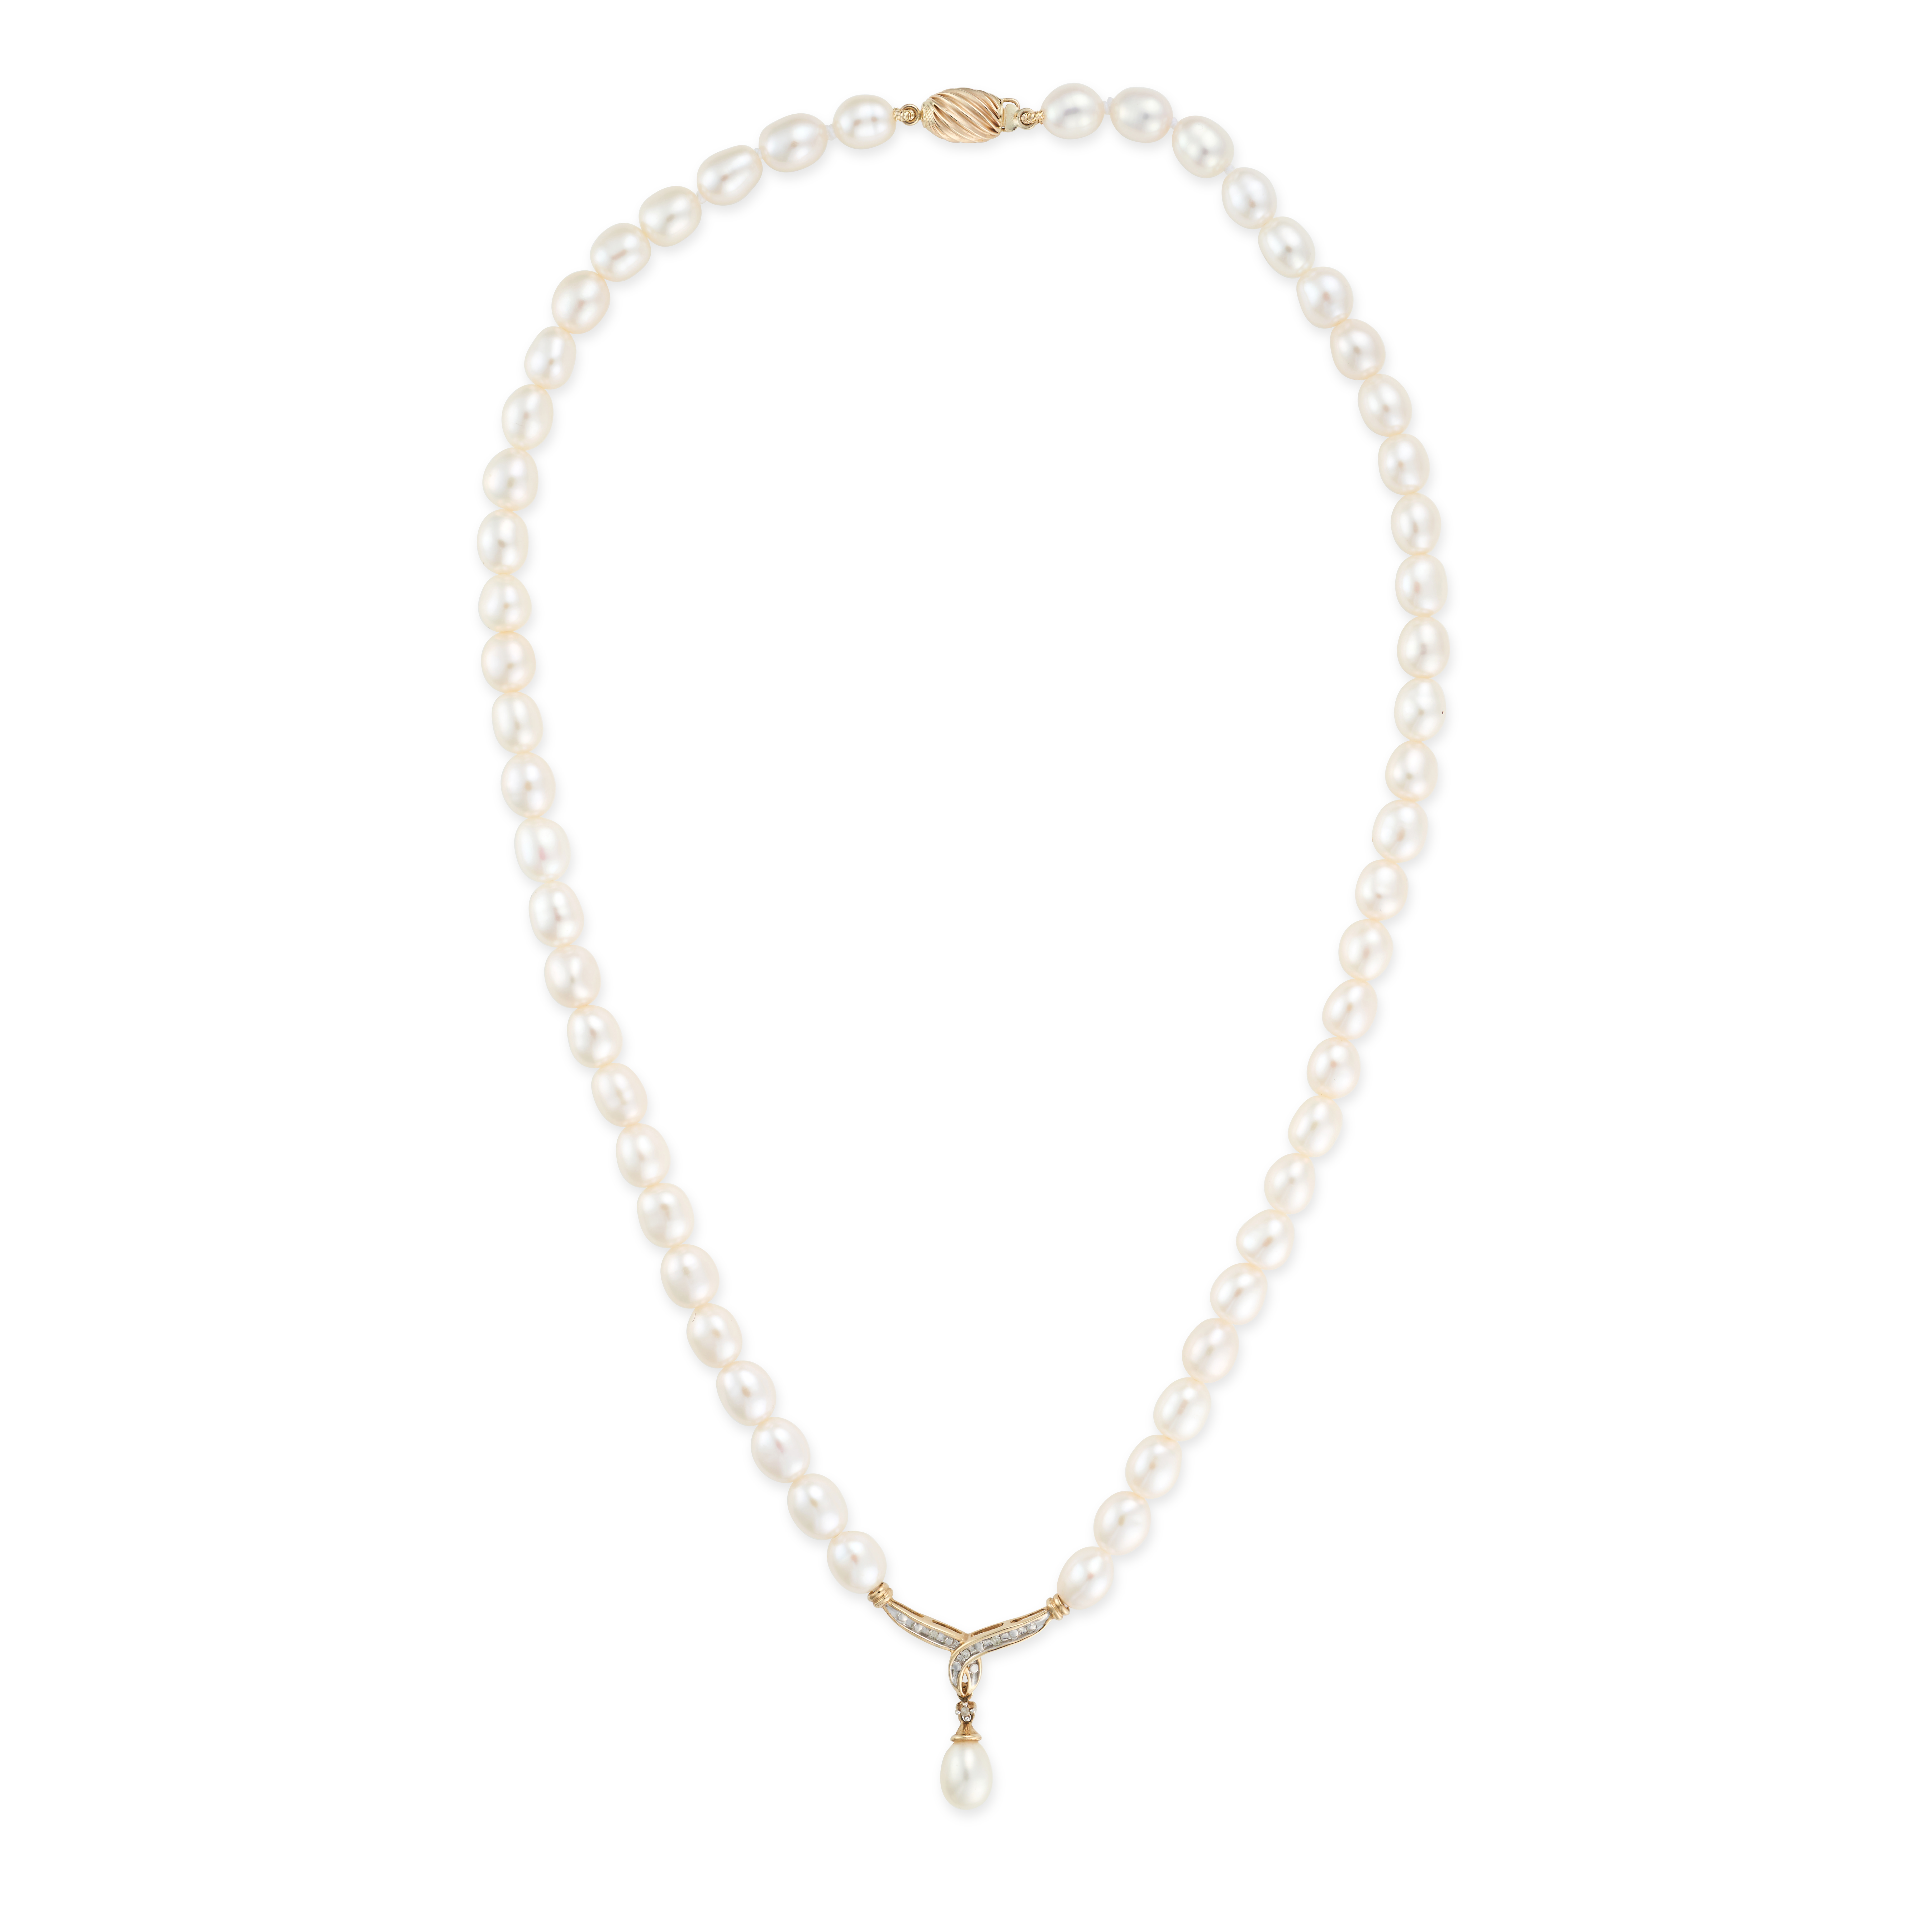 A PEARL AND DIAMOND PENDANT NECKLACE comprising a single row of pearls, suspending a pendant set ...